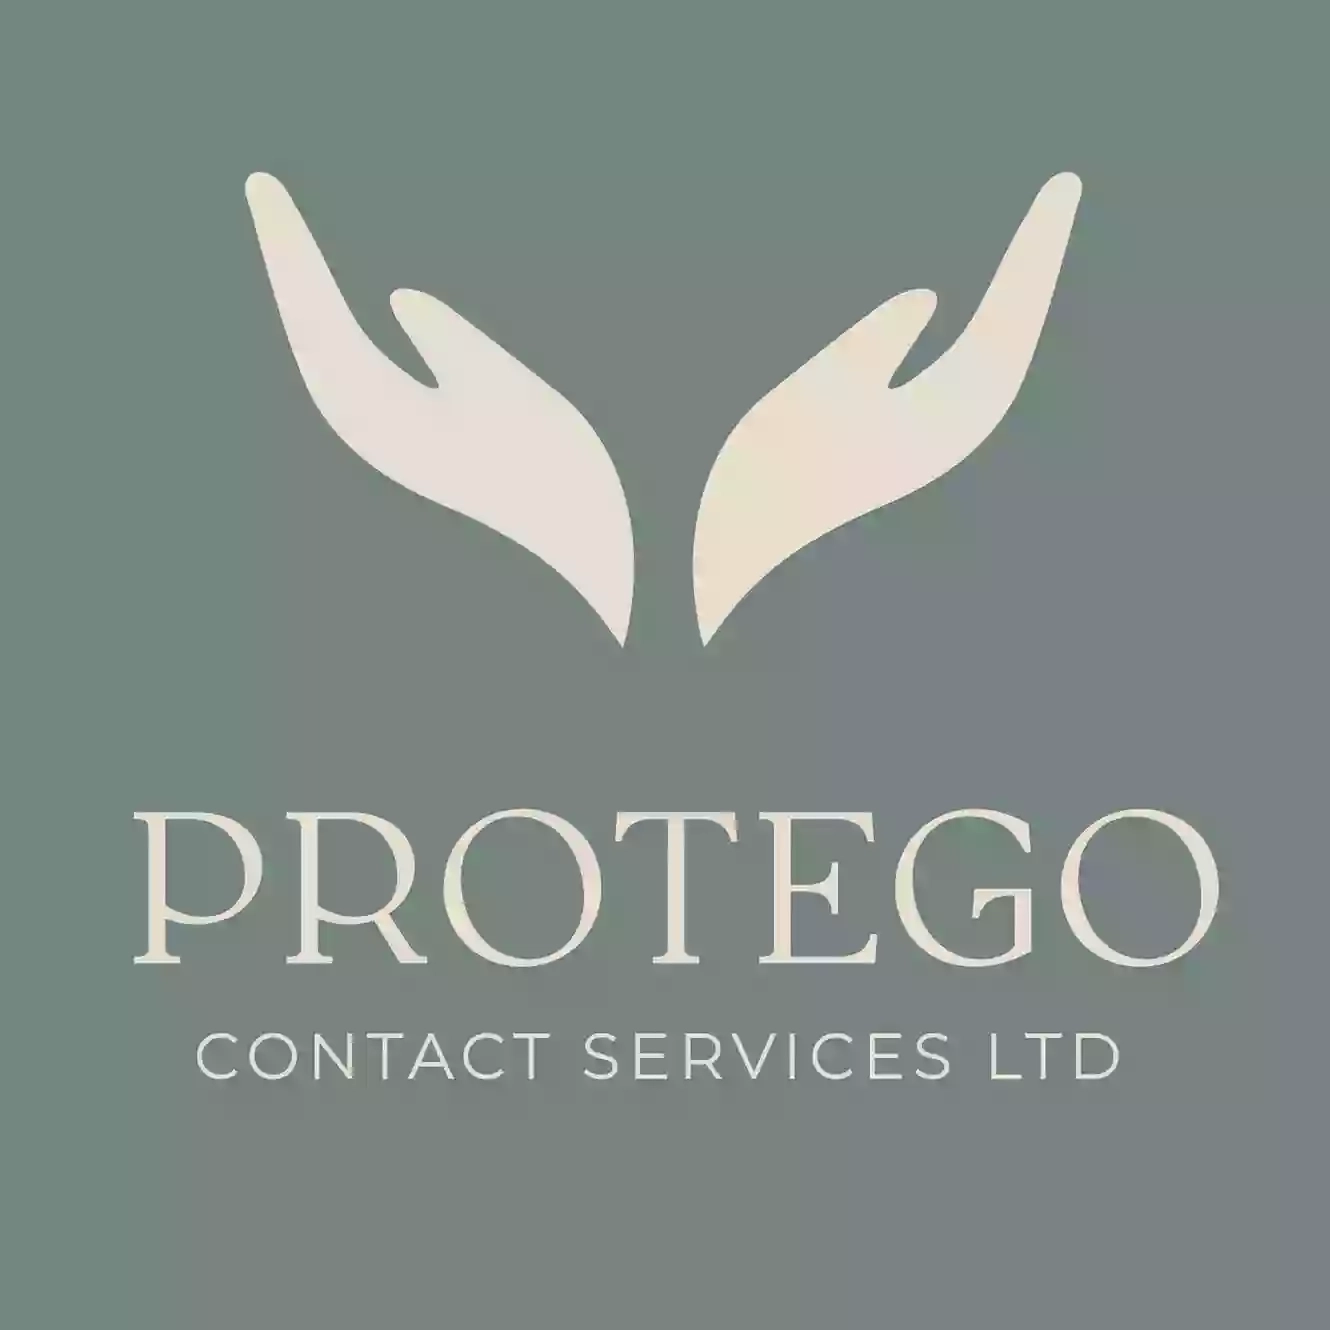 Protego Contact Services Limited